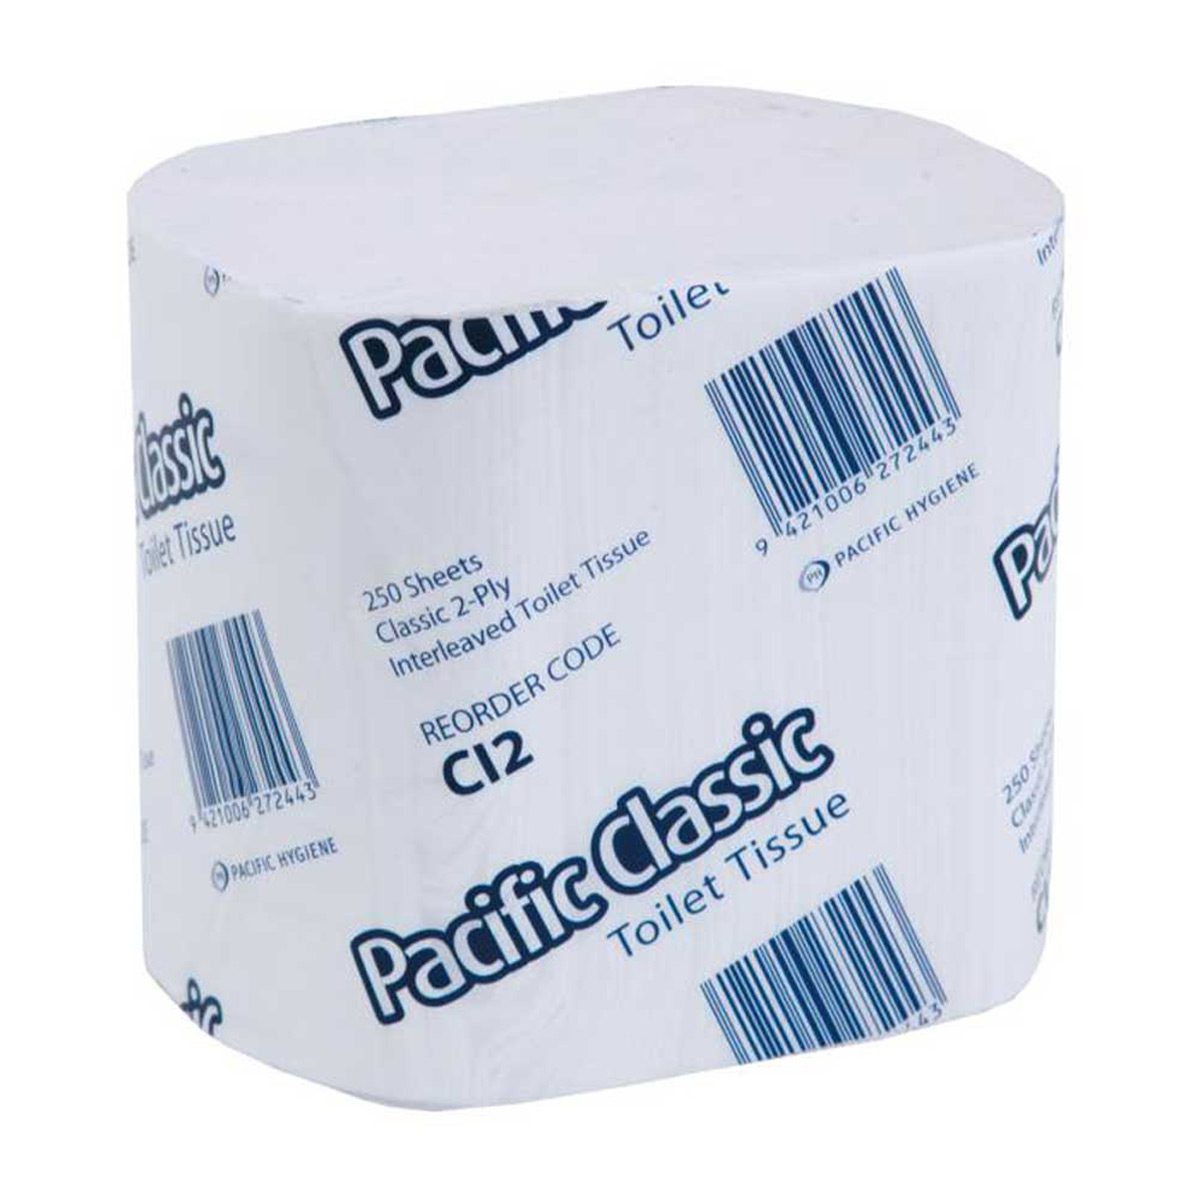 paper-products-toilet-paper-classic-2-ply-interleaved-toilet-paper-quality-value-100%-virgin-material-dispensers-single-sheet-time-reducing-tissue-wastage-superior hygiene-svjs-distributors-PHCI-2